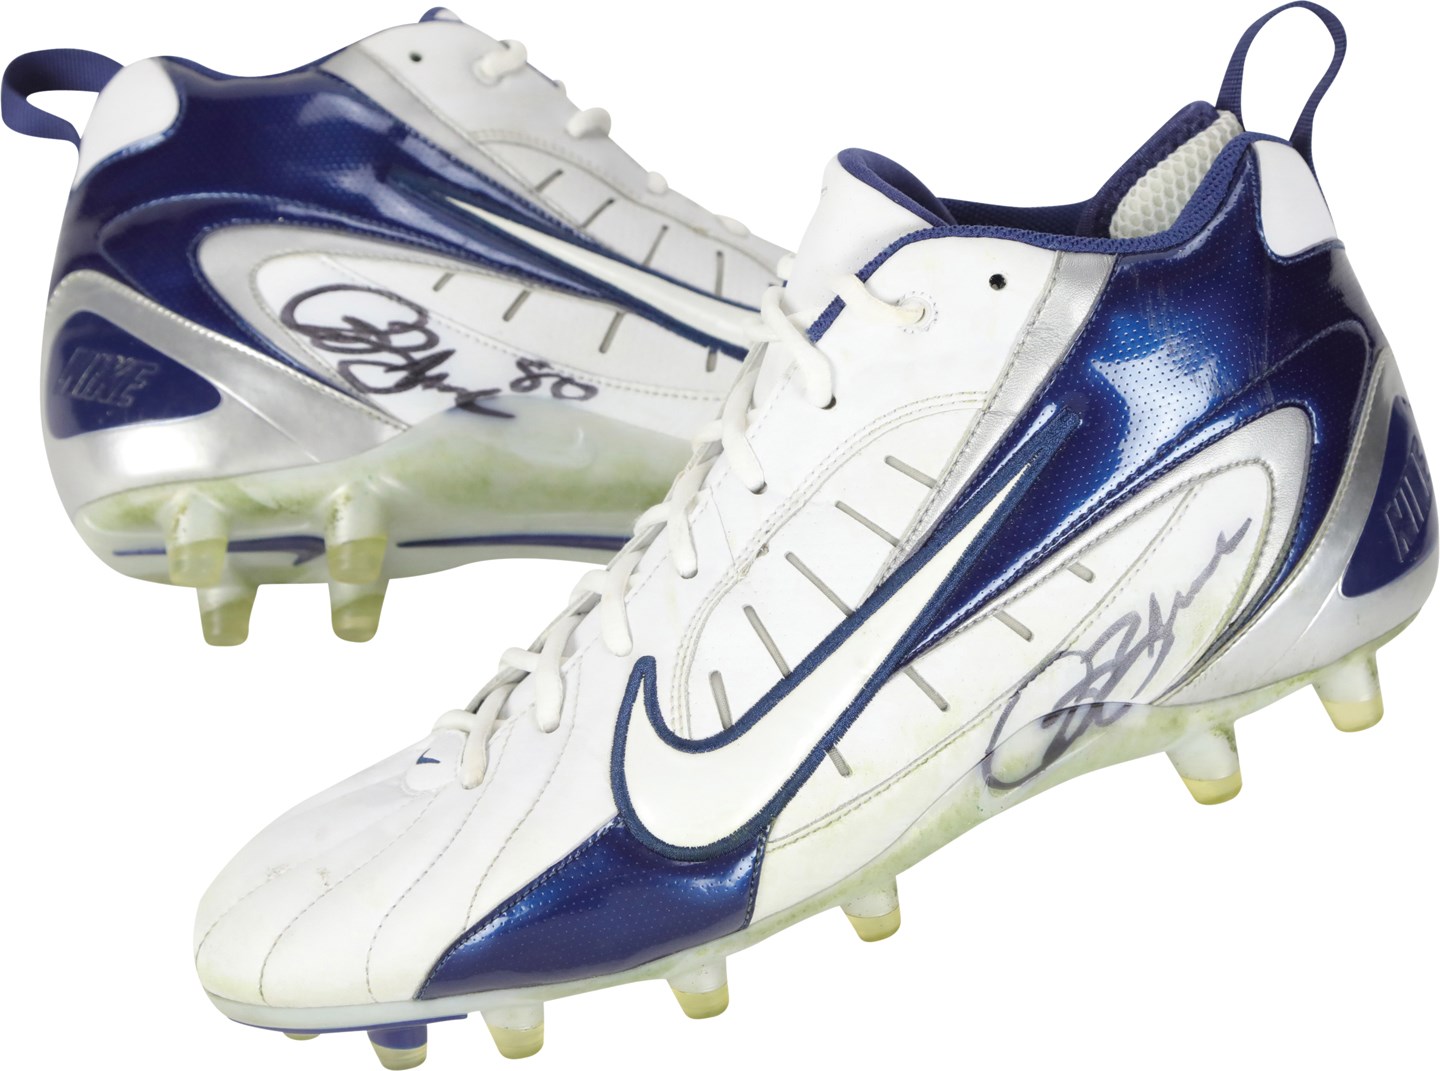 - Isaac Bruce St. Louis Rams Game Used Signed Cleats